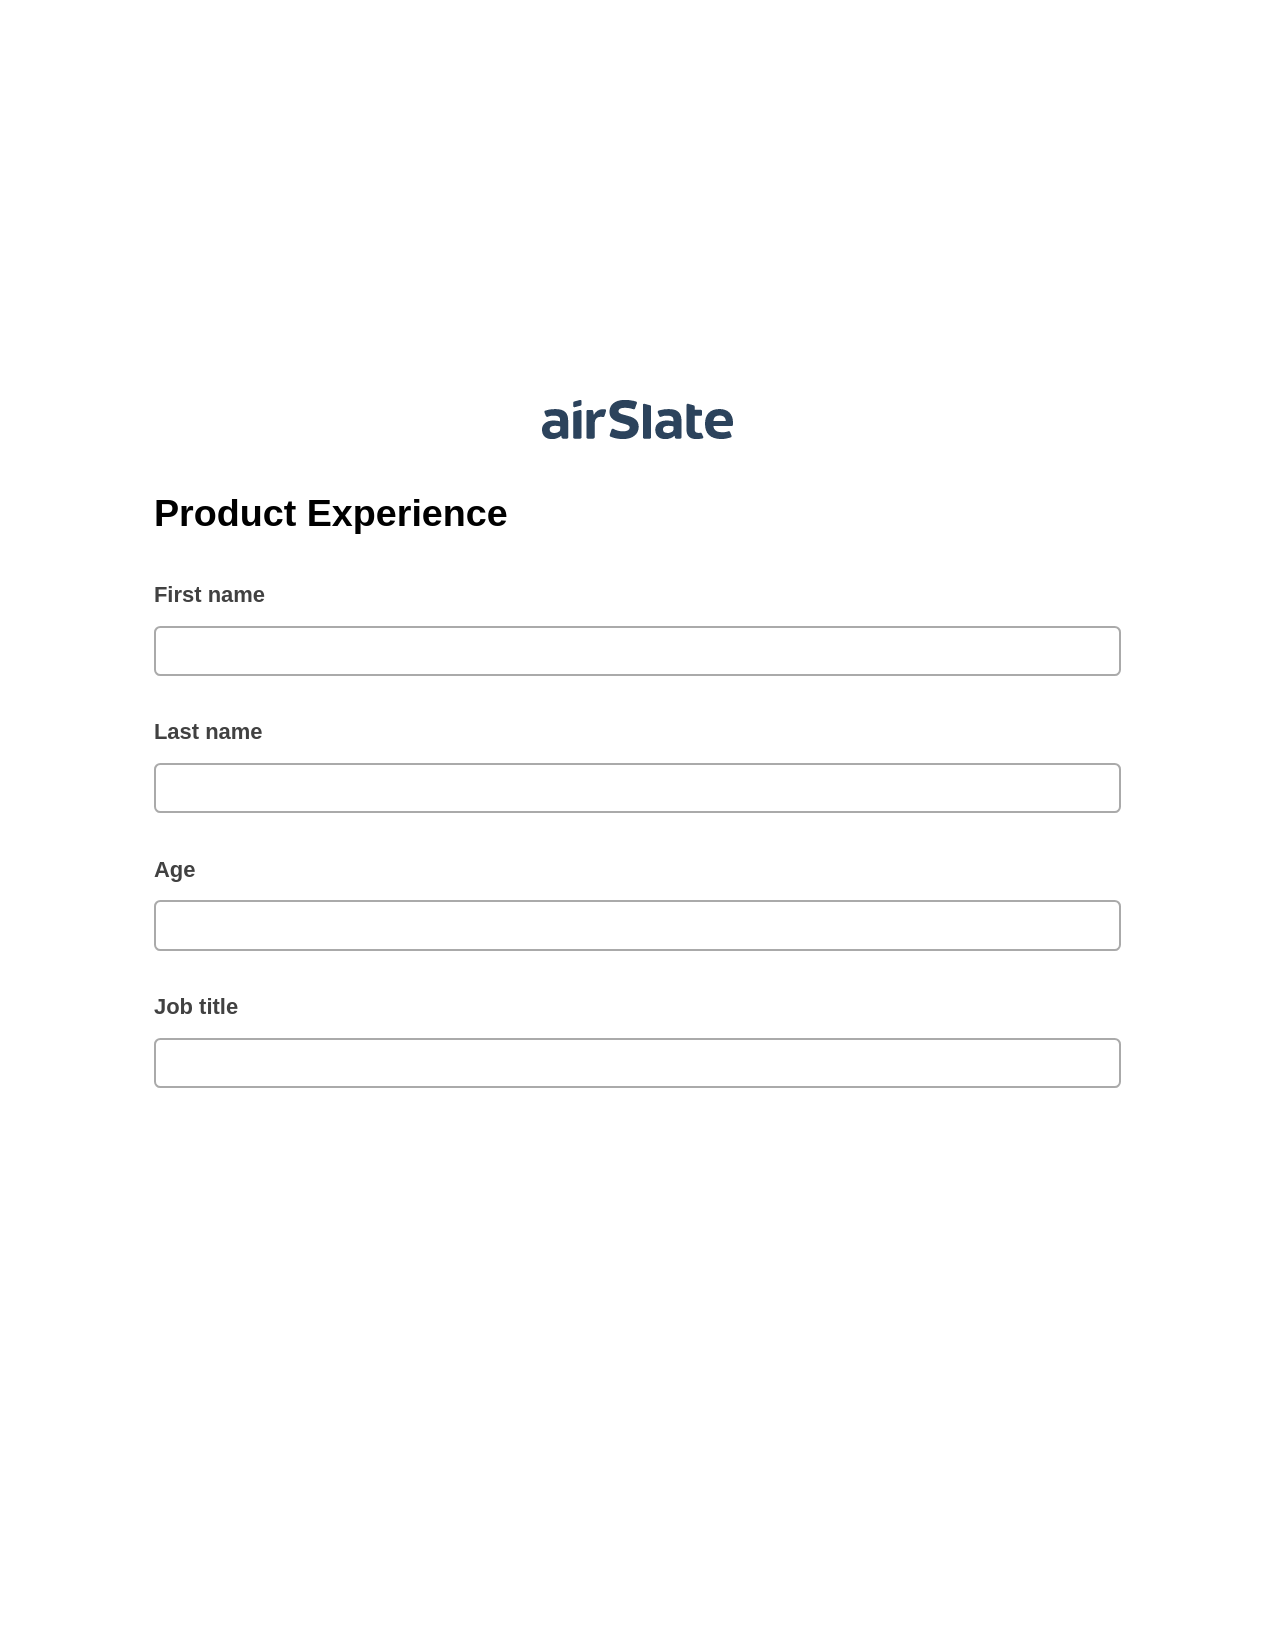 Product Experience Pre-fill from CSV File Bot, Mailchimp add recipient to audience Bot, Post-finish Document Bot